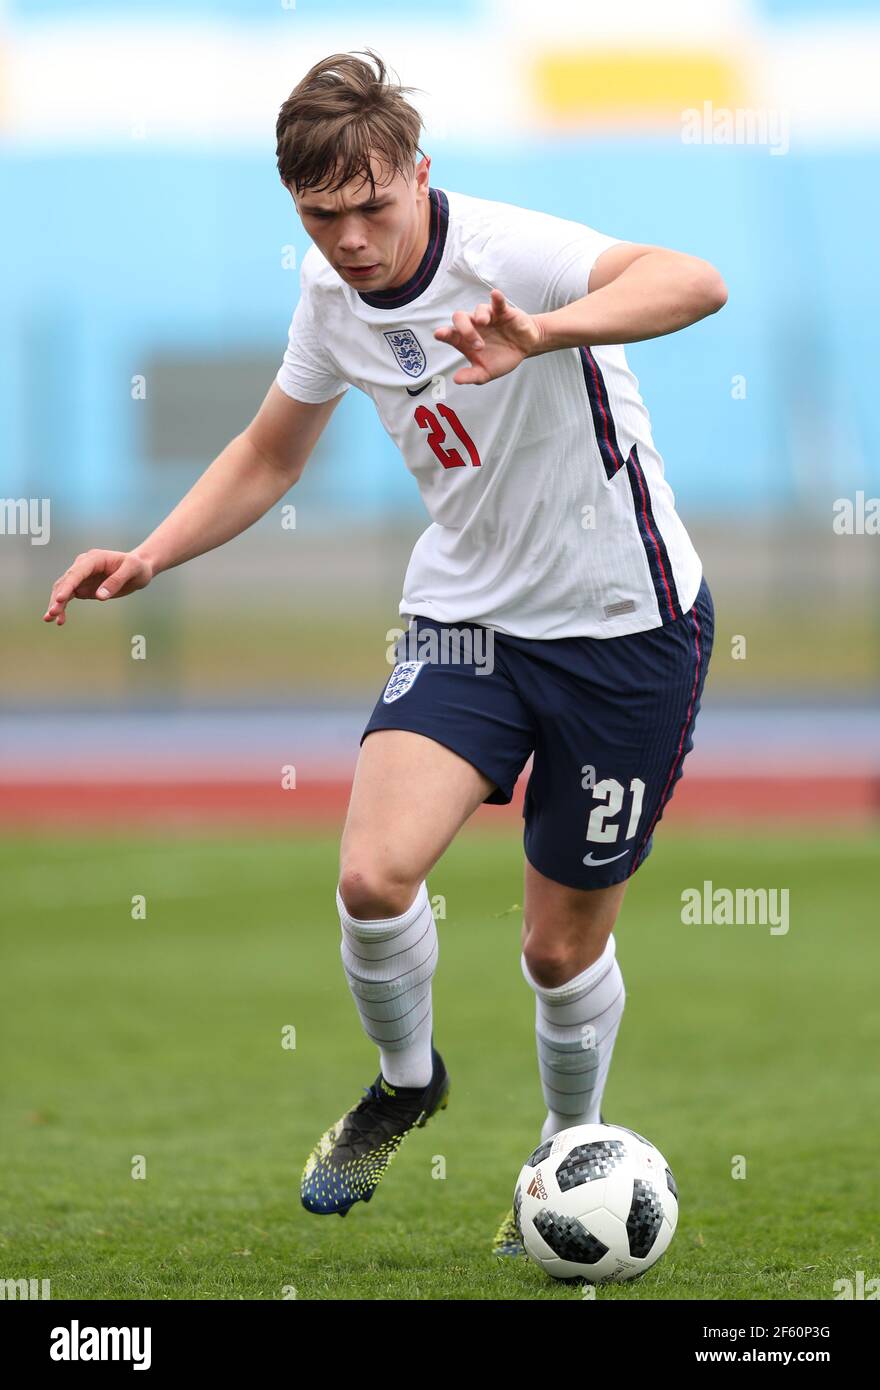 England's Callum Doyle during the Under-18 International Friendly match at the Leckwith Stadium, Cardiff. Picture date: Monday March 29, 2021. Stock Photo